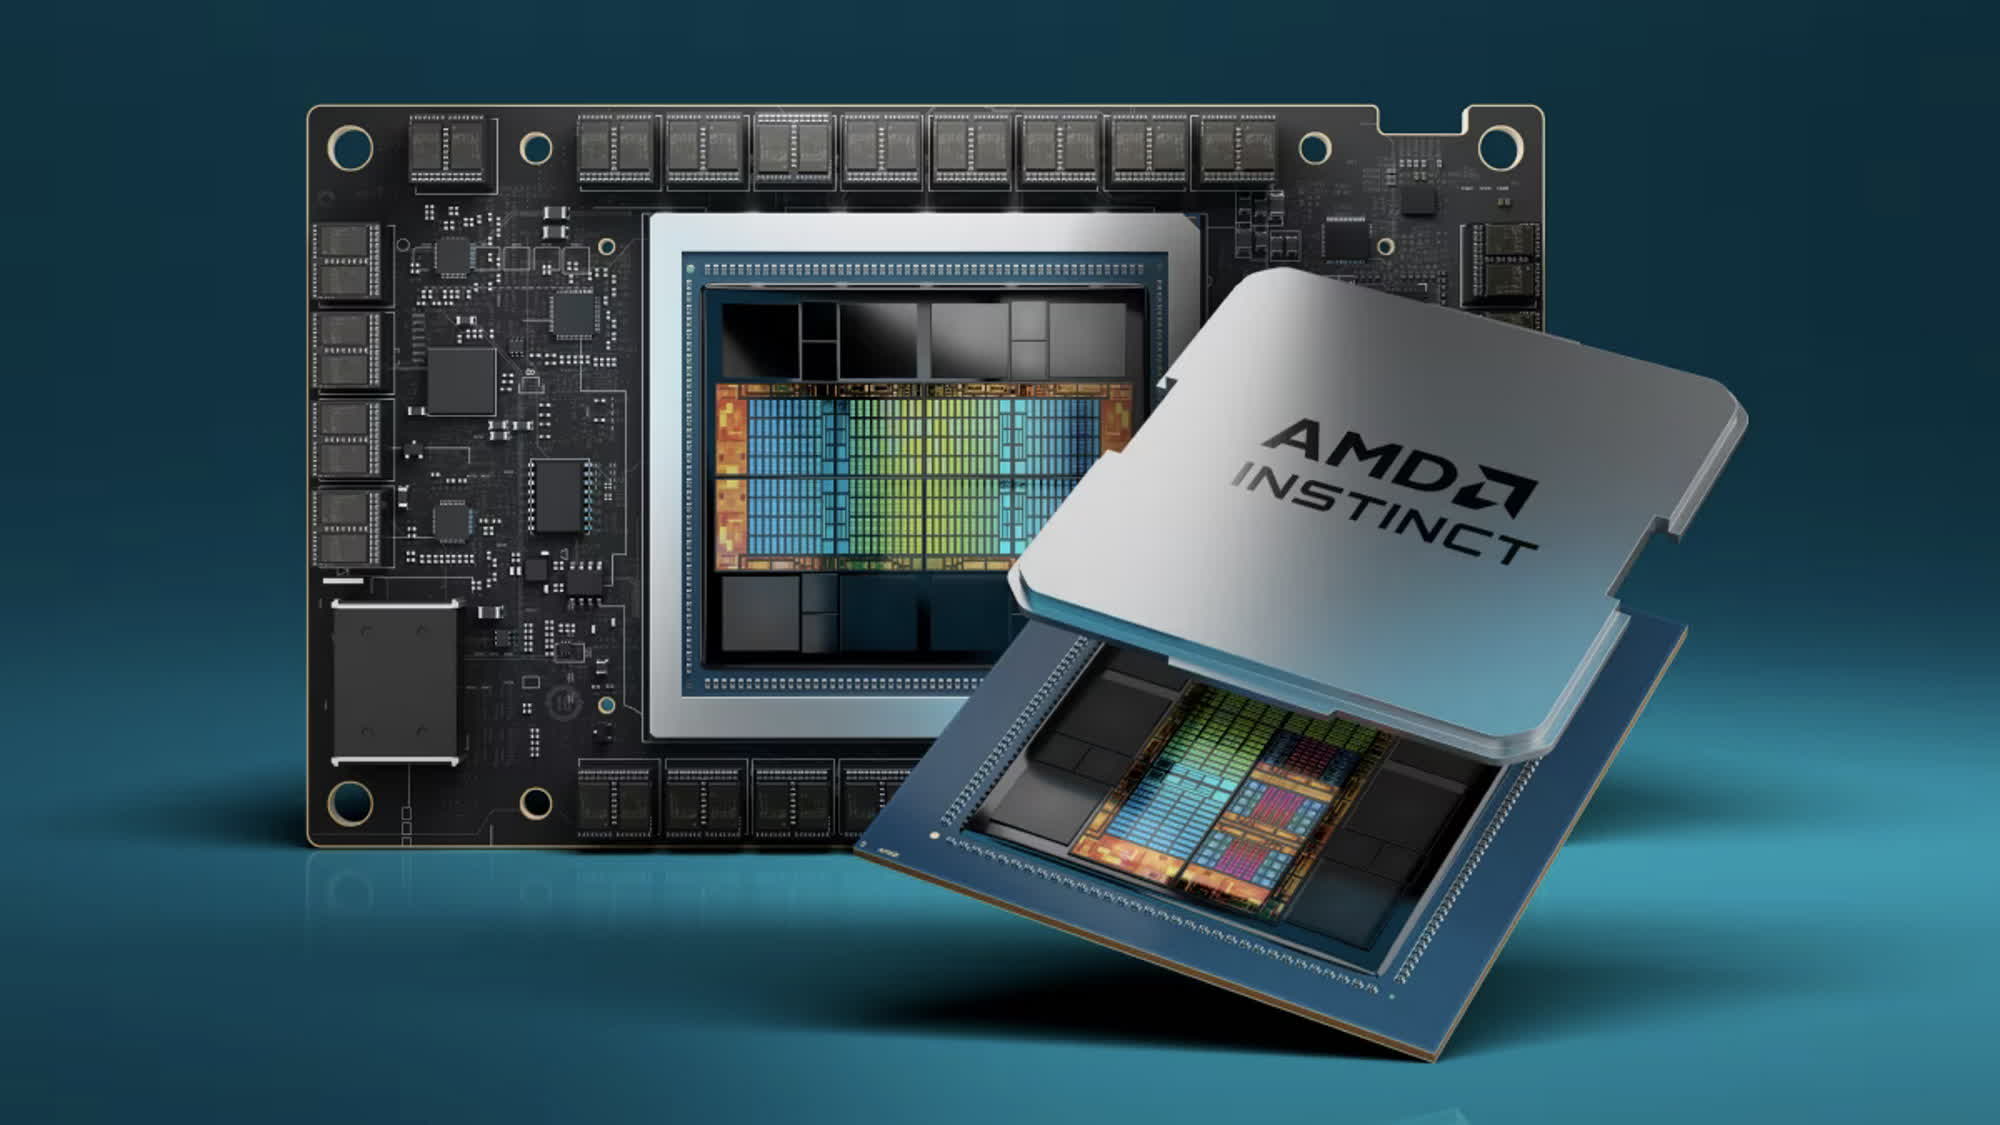 AMD says its MI300X AI accelerator is faster than Nvidia's H100